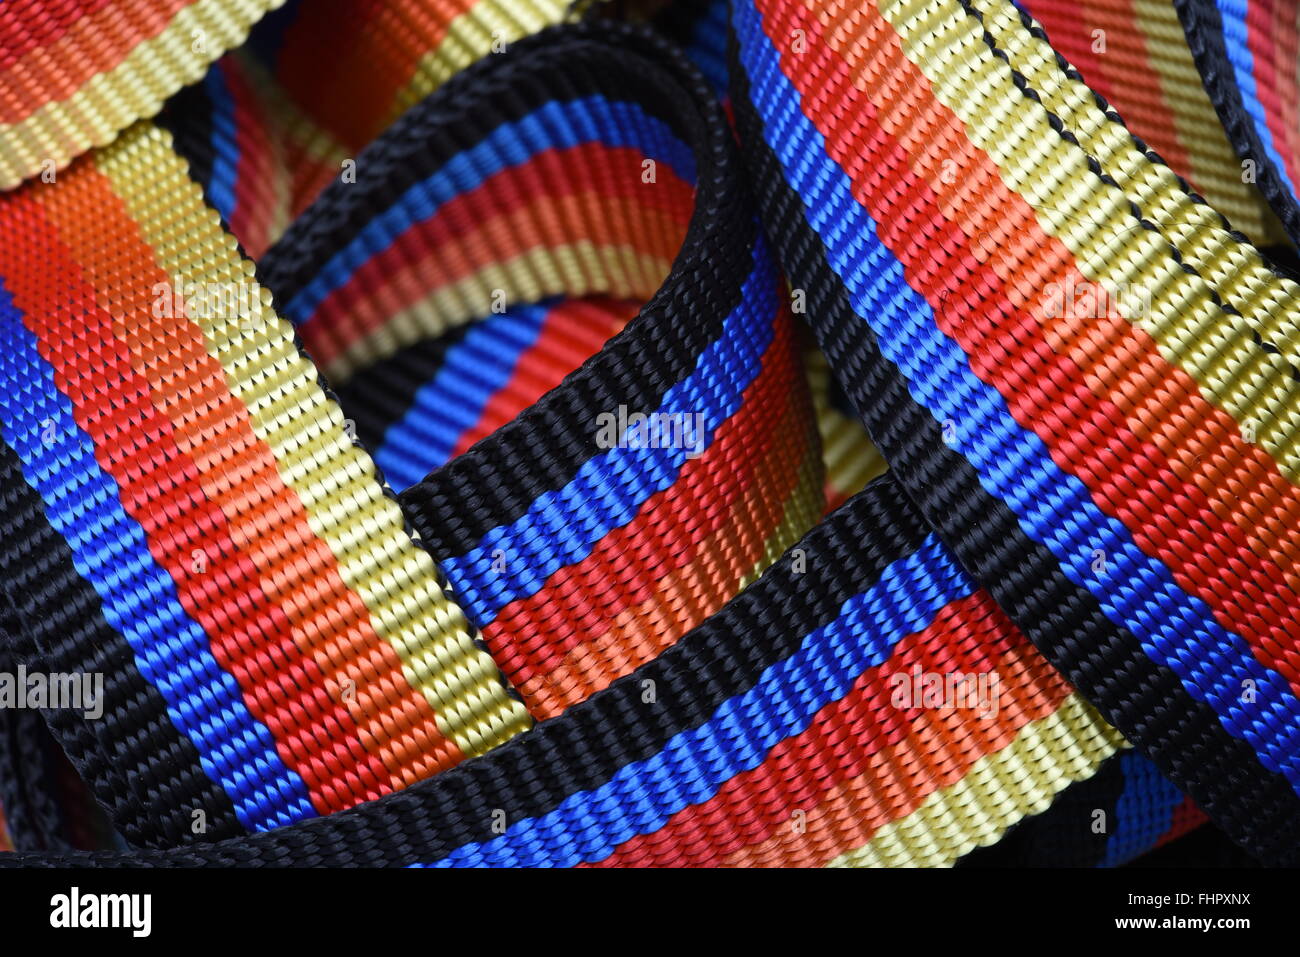 Tool, colorful ratchet strap for cargo Stock Photo